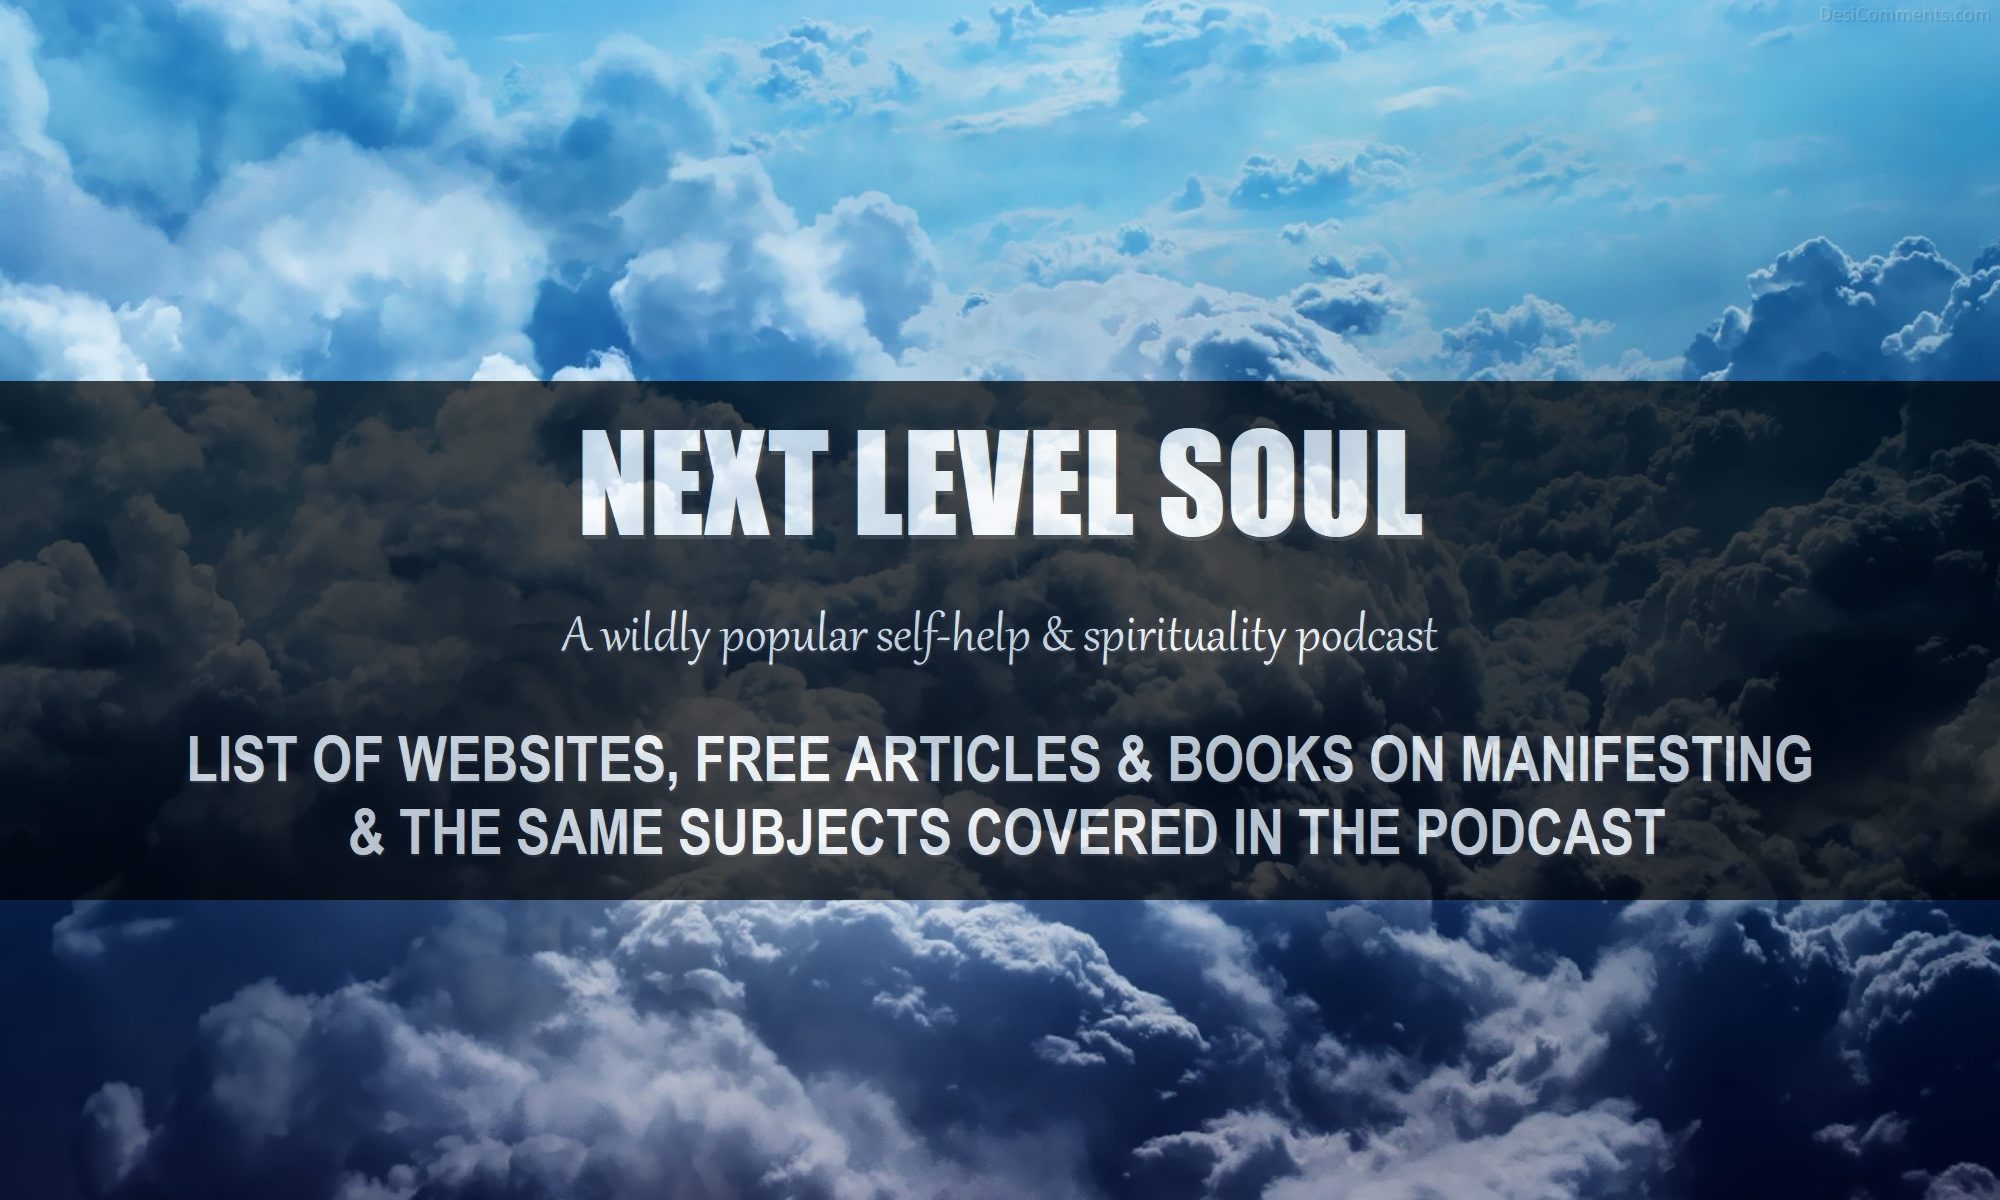 List of Websites, Free Articles & Books On Next Level Soul Podcast Subjects, Manifesting